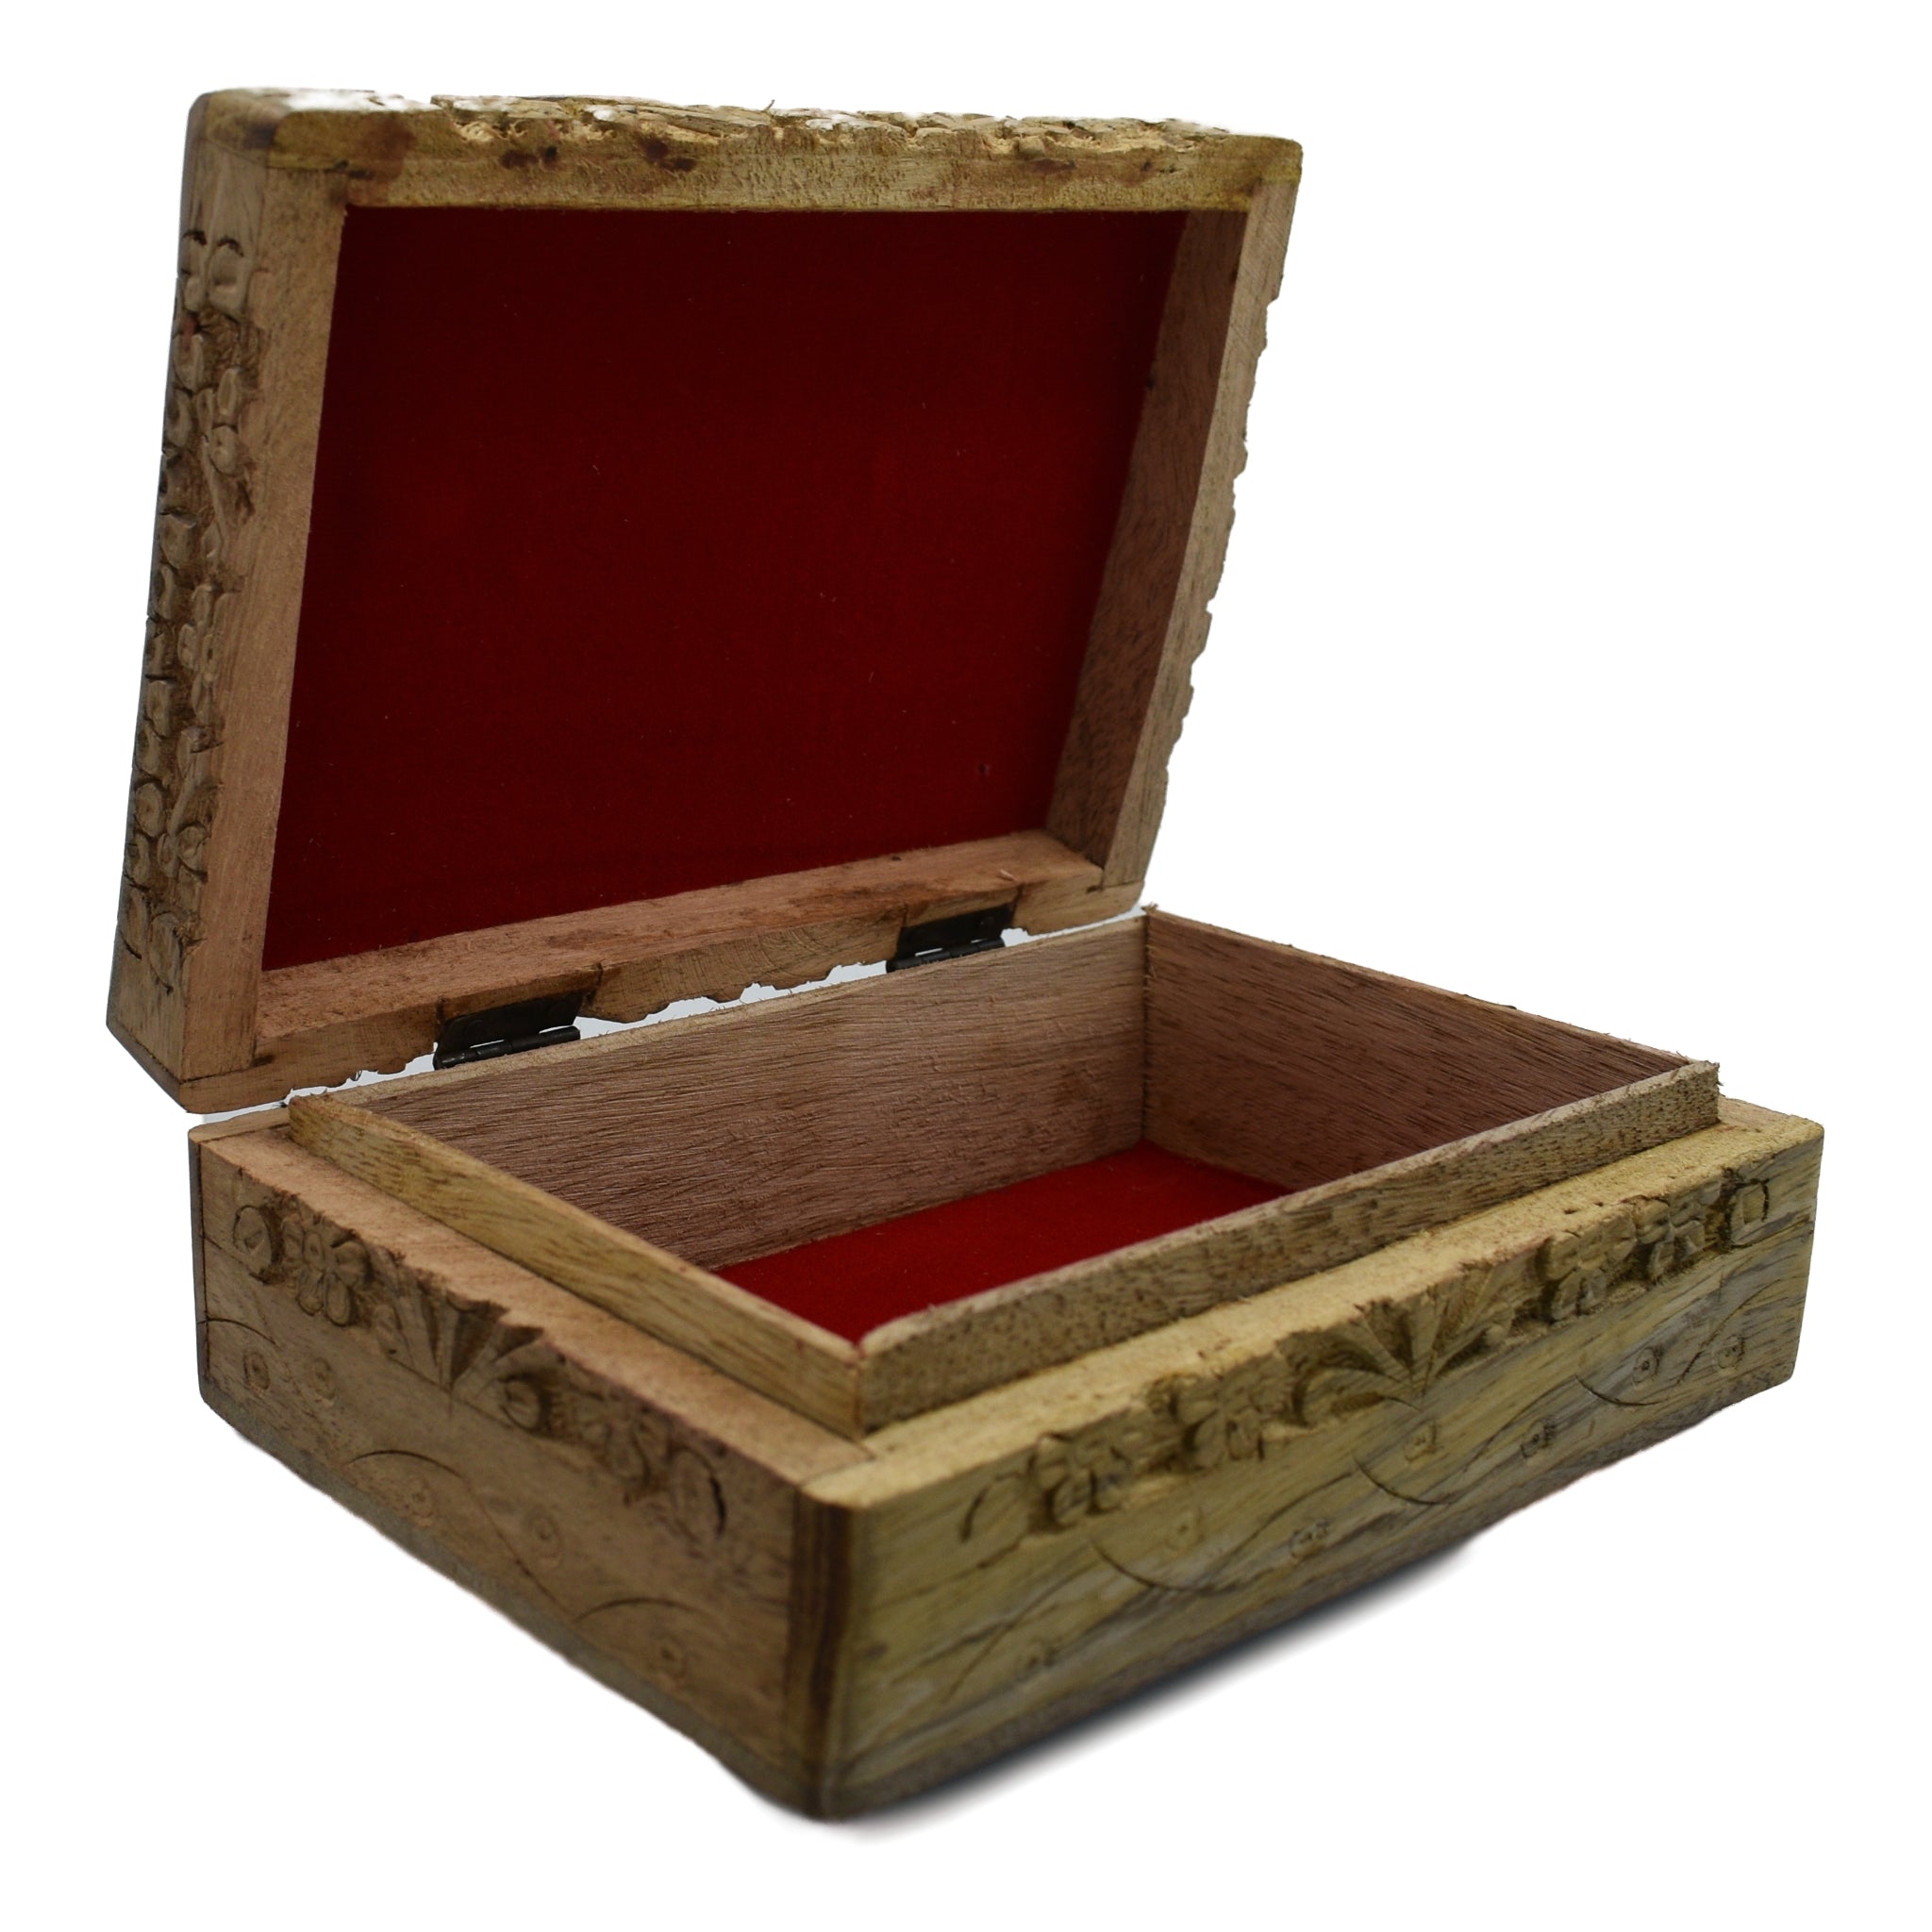 Natural wood color open box red cloth on inside 